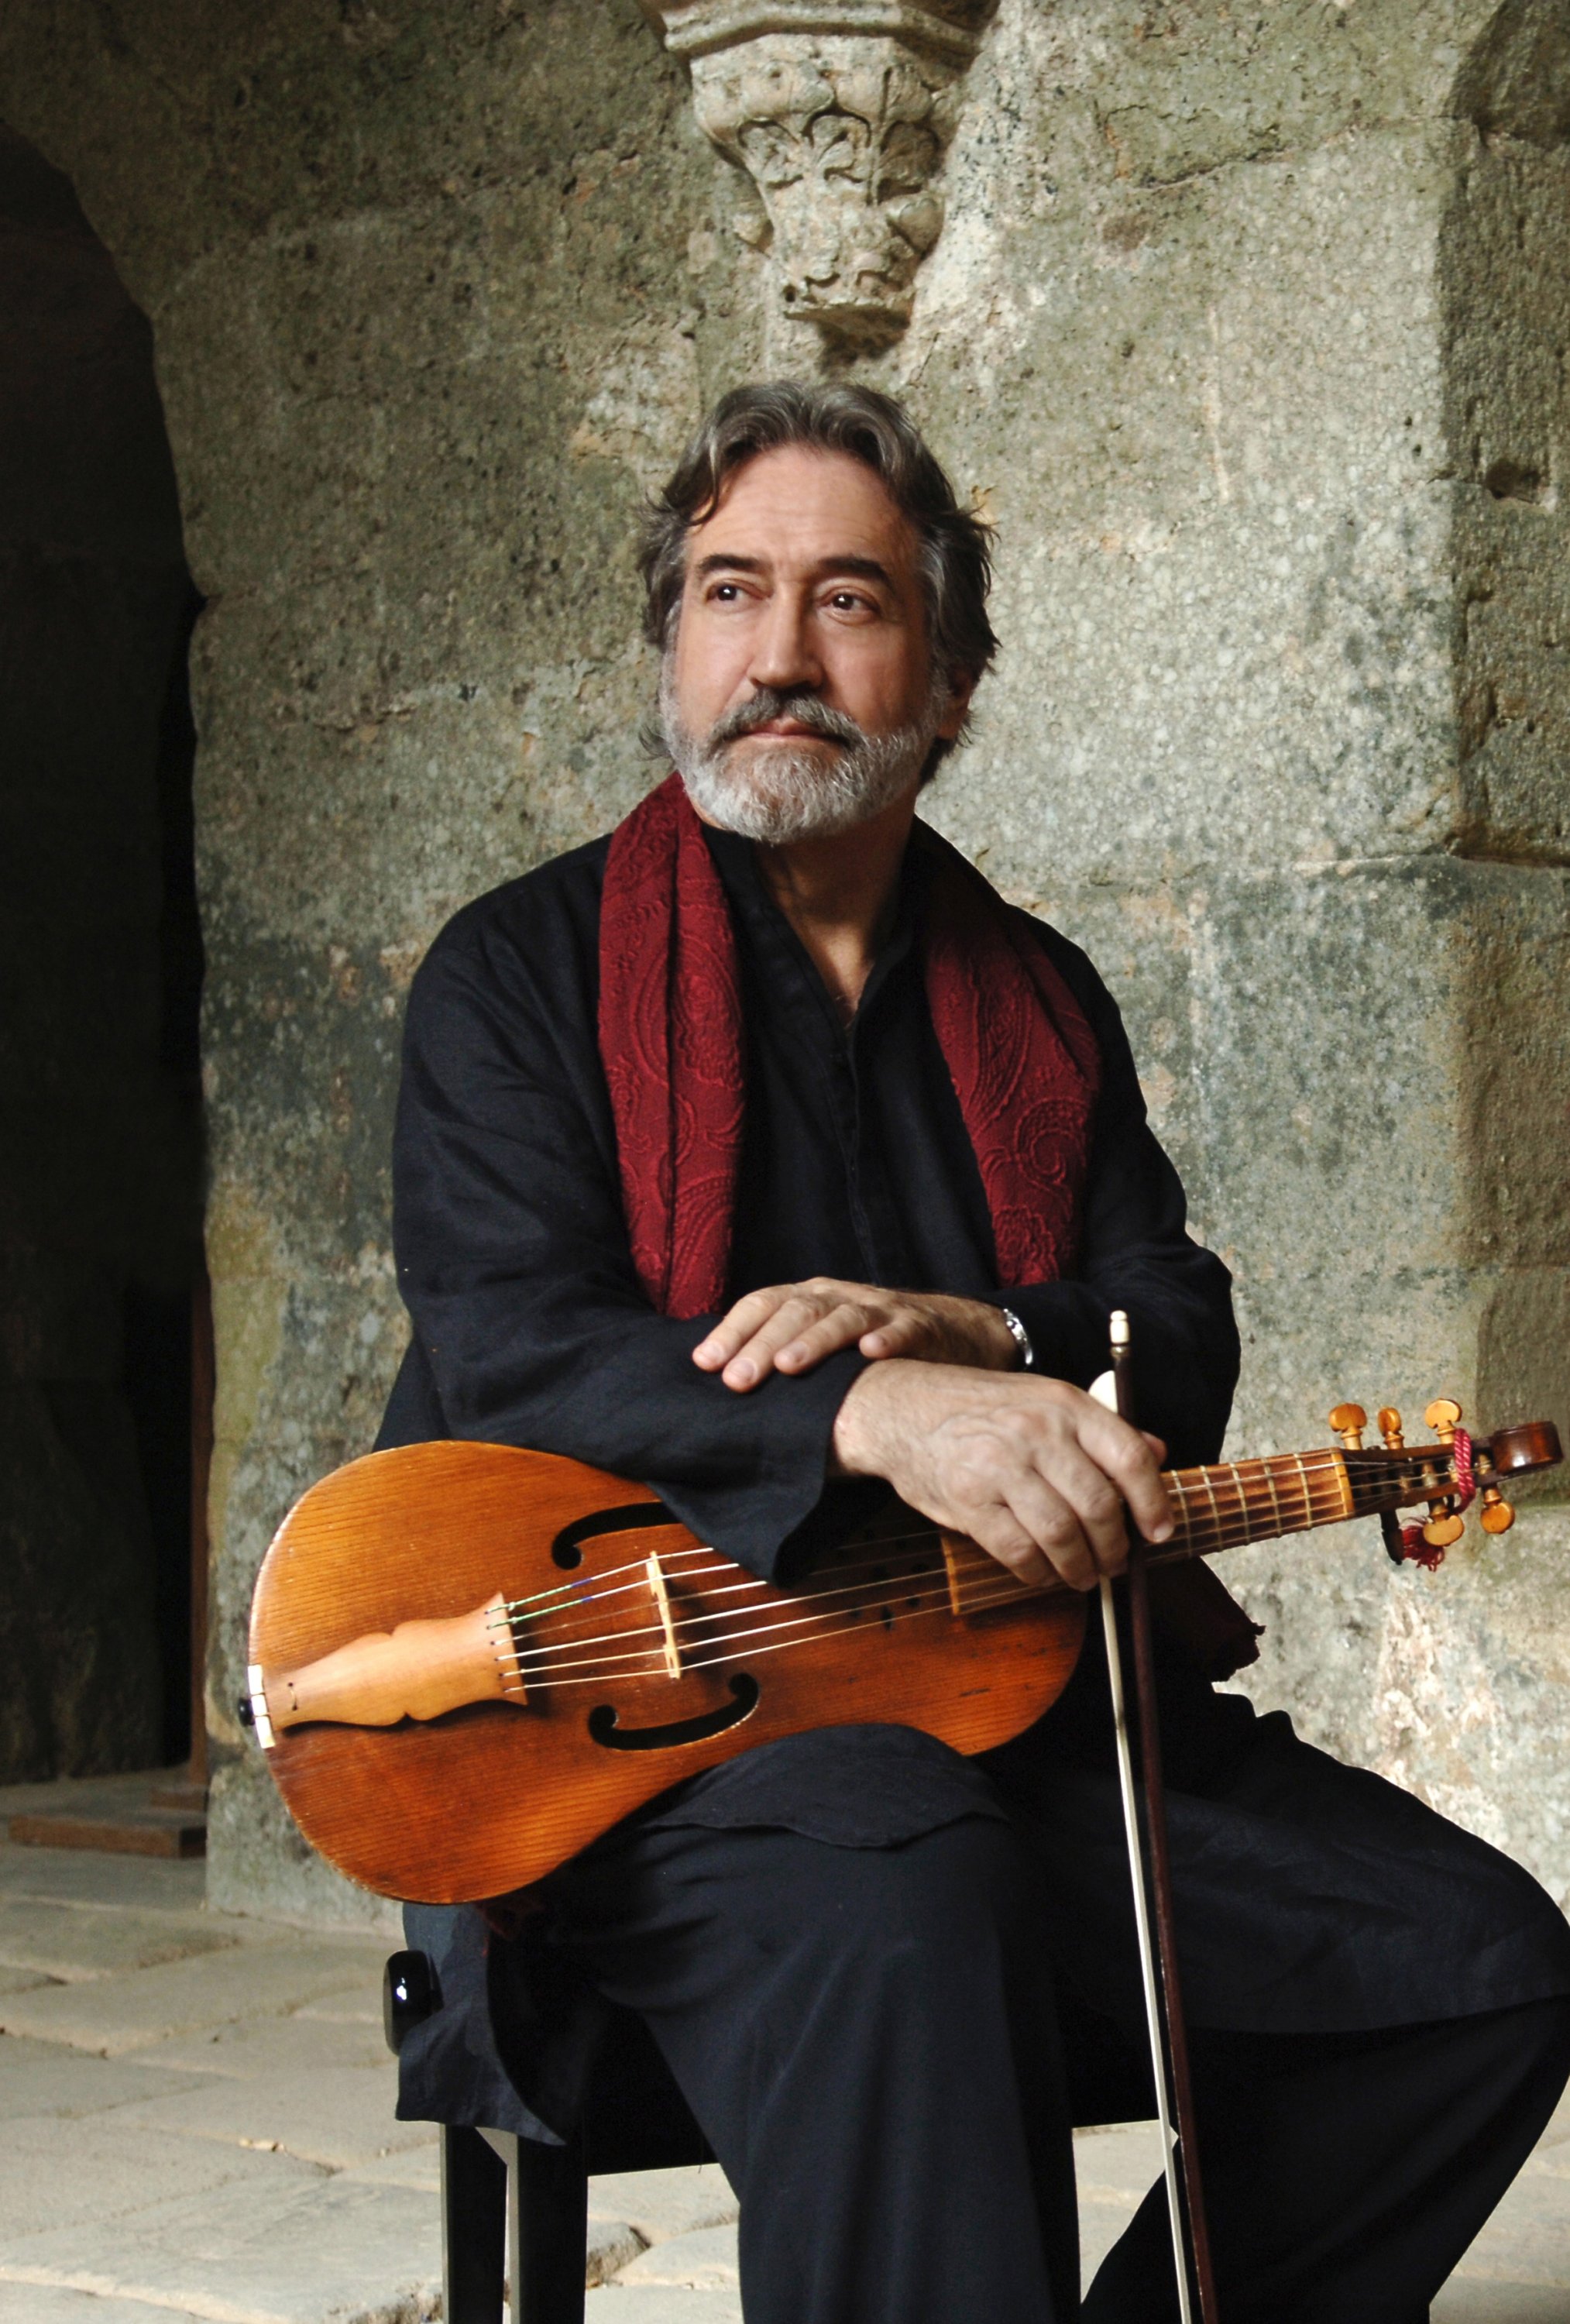 Jordi Savall's concert will tell the story of Ibn Battuta. (Courtesy of CRR Concert Hall)